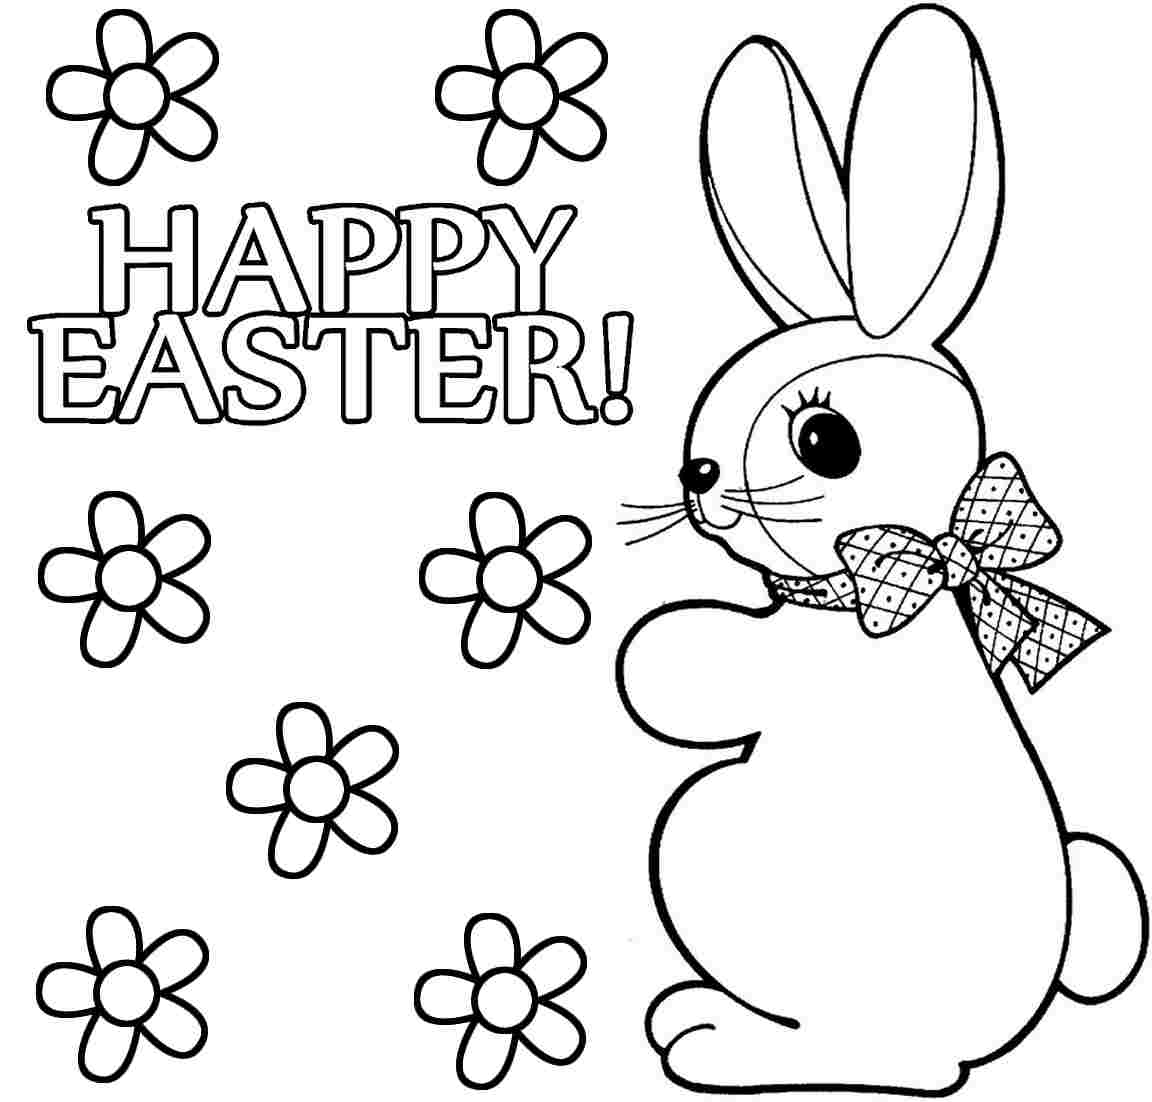 5-best-images-of-free-bunny-silhouette-printable-8-x-10-free-printable-easter-bunny-silhouette